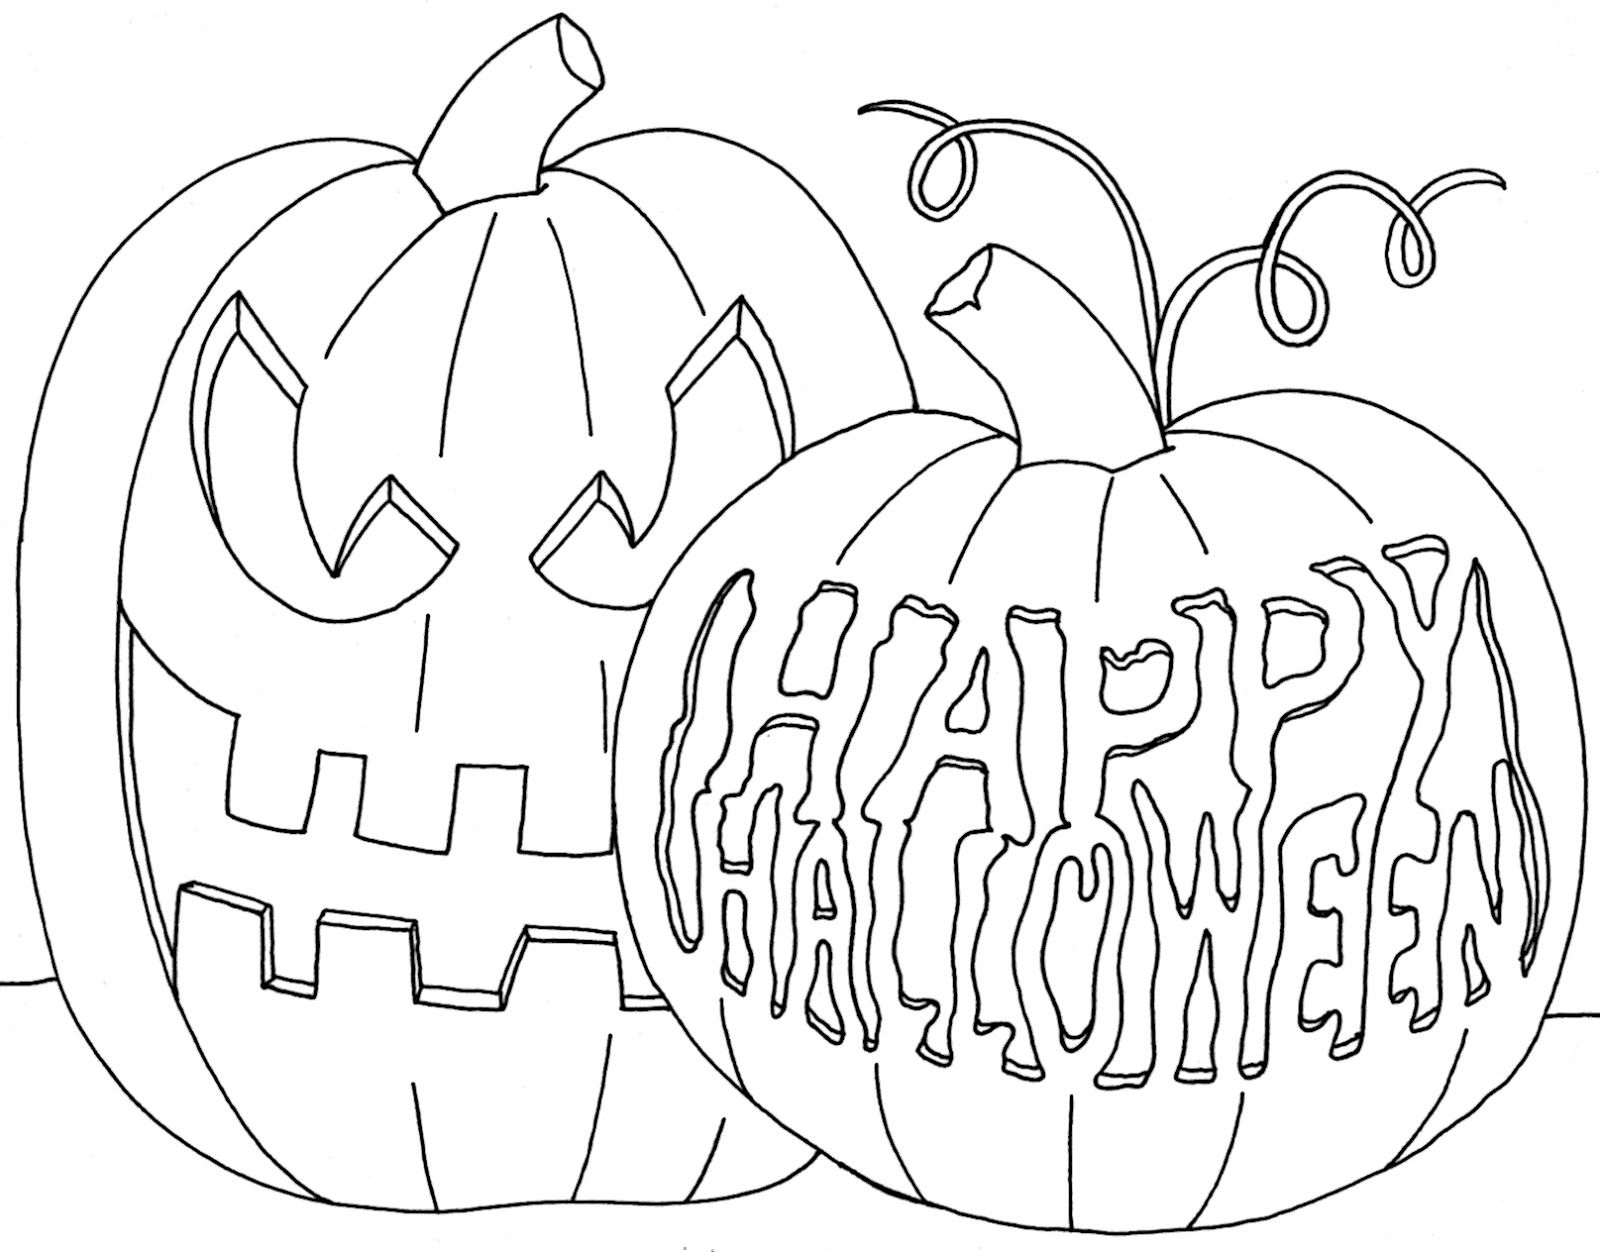 Happy Halloween Pumpkin Coloring Pages To Color | Hallowen ...